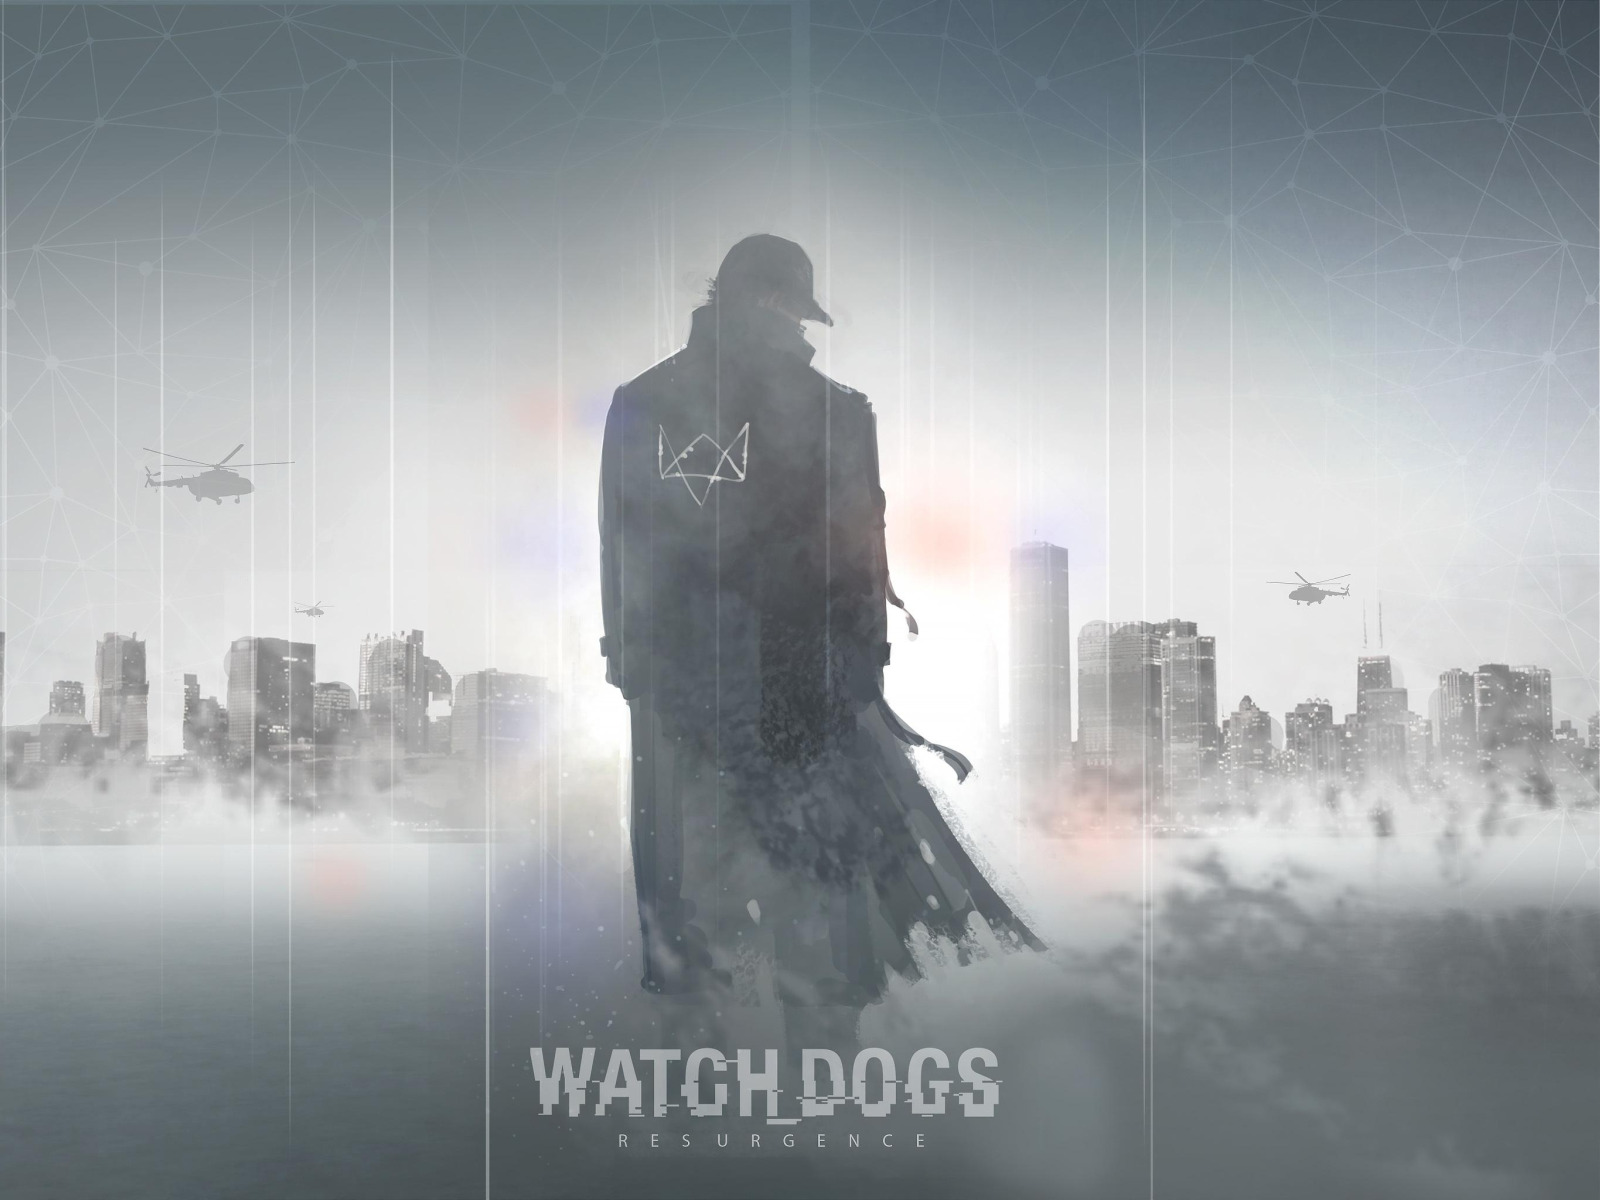 The watch dogs steam фото 17